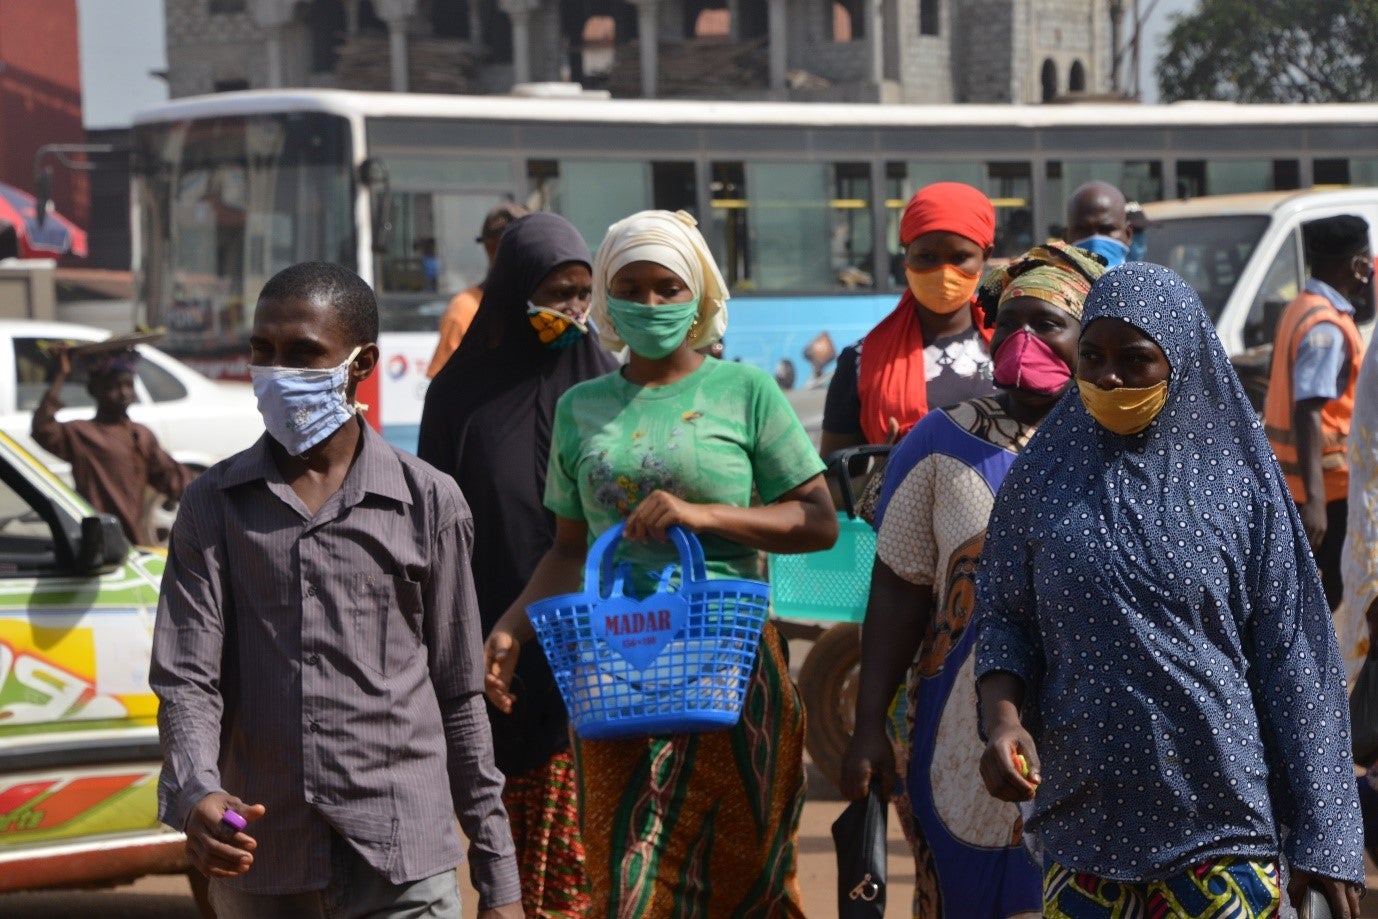 People wearing protective masks in the city of Conakry, Guinea, on April 29, 2020.